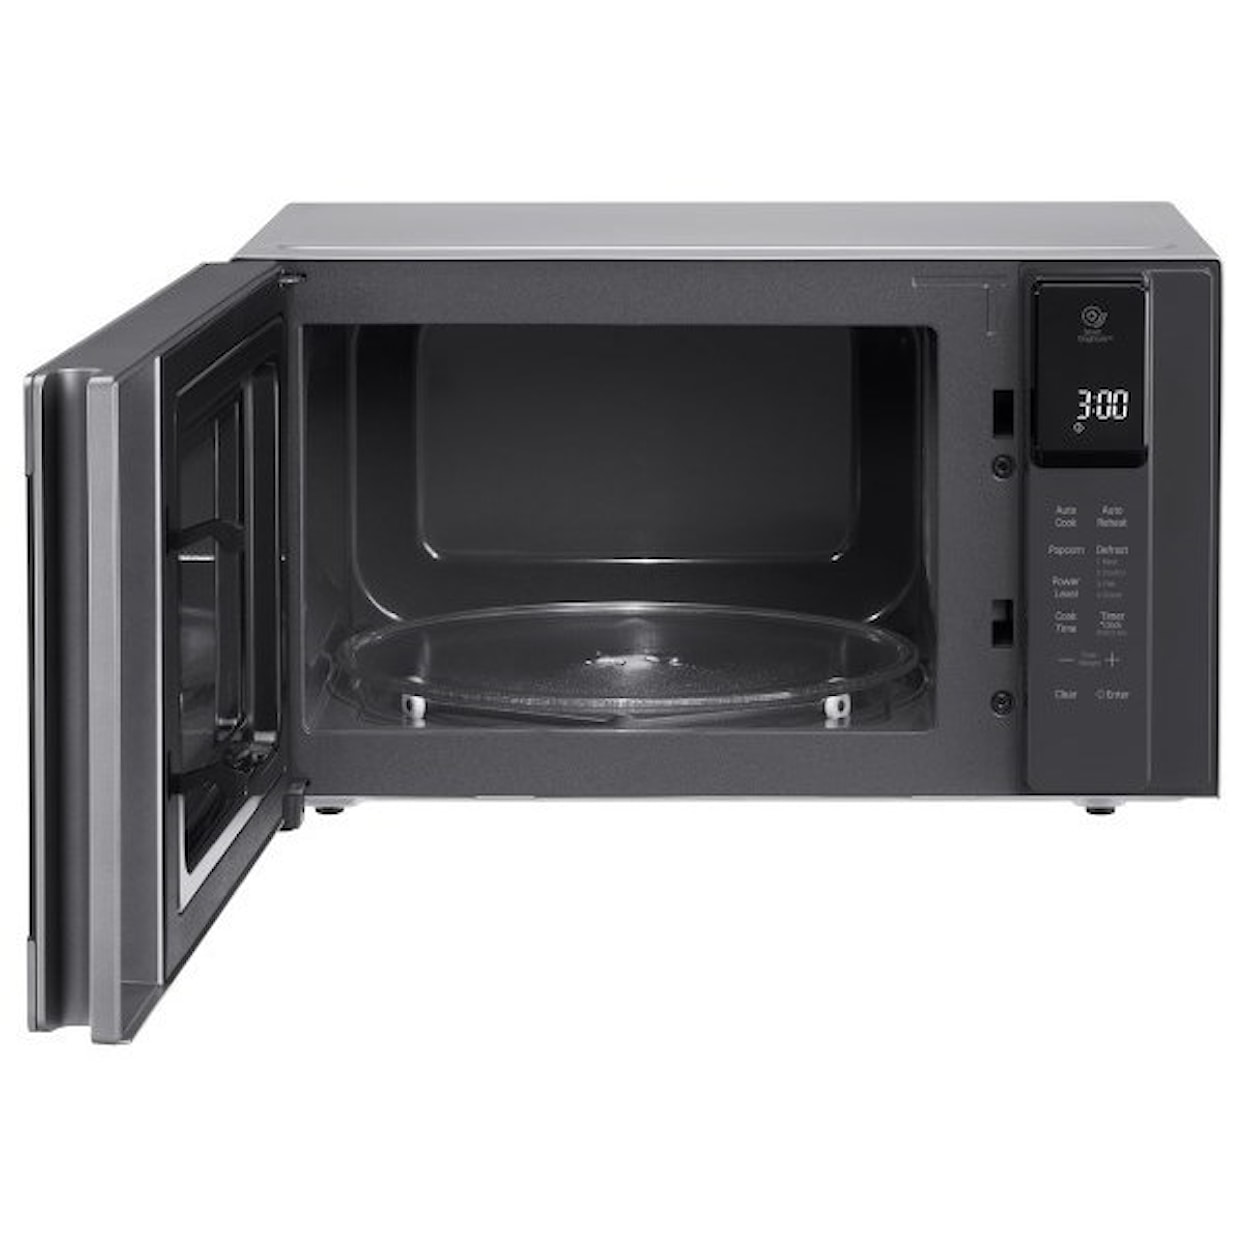 LG Appliances Microwaves 0.9 cu. ft. NeoChef™ Countertop Microwave